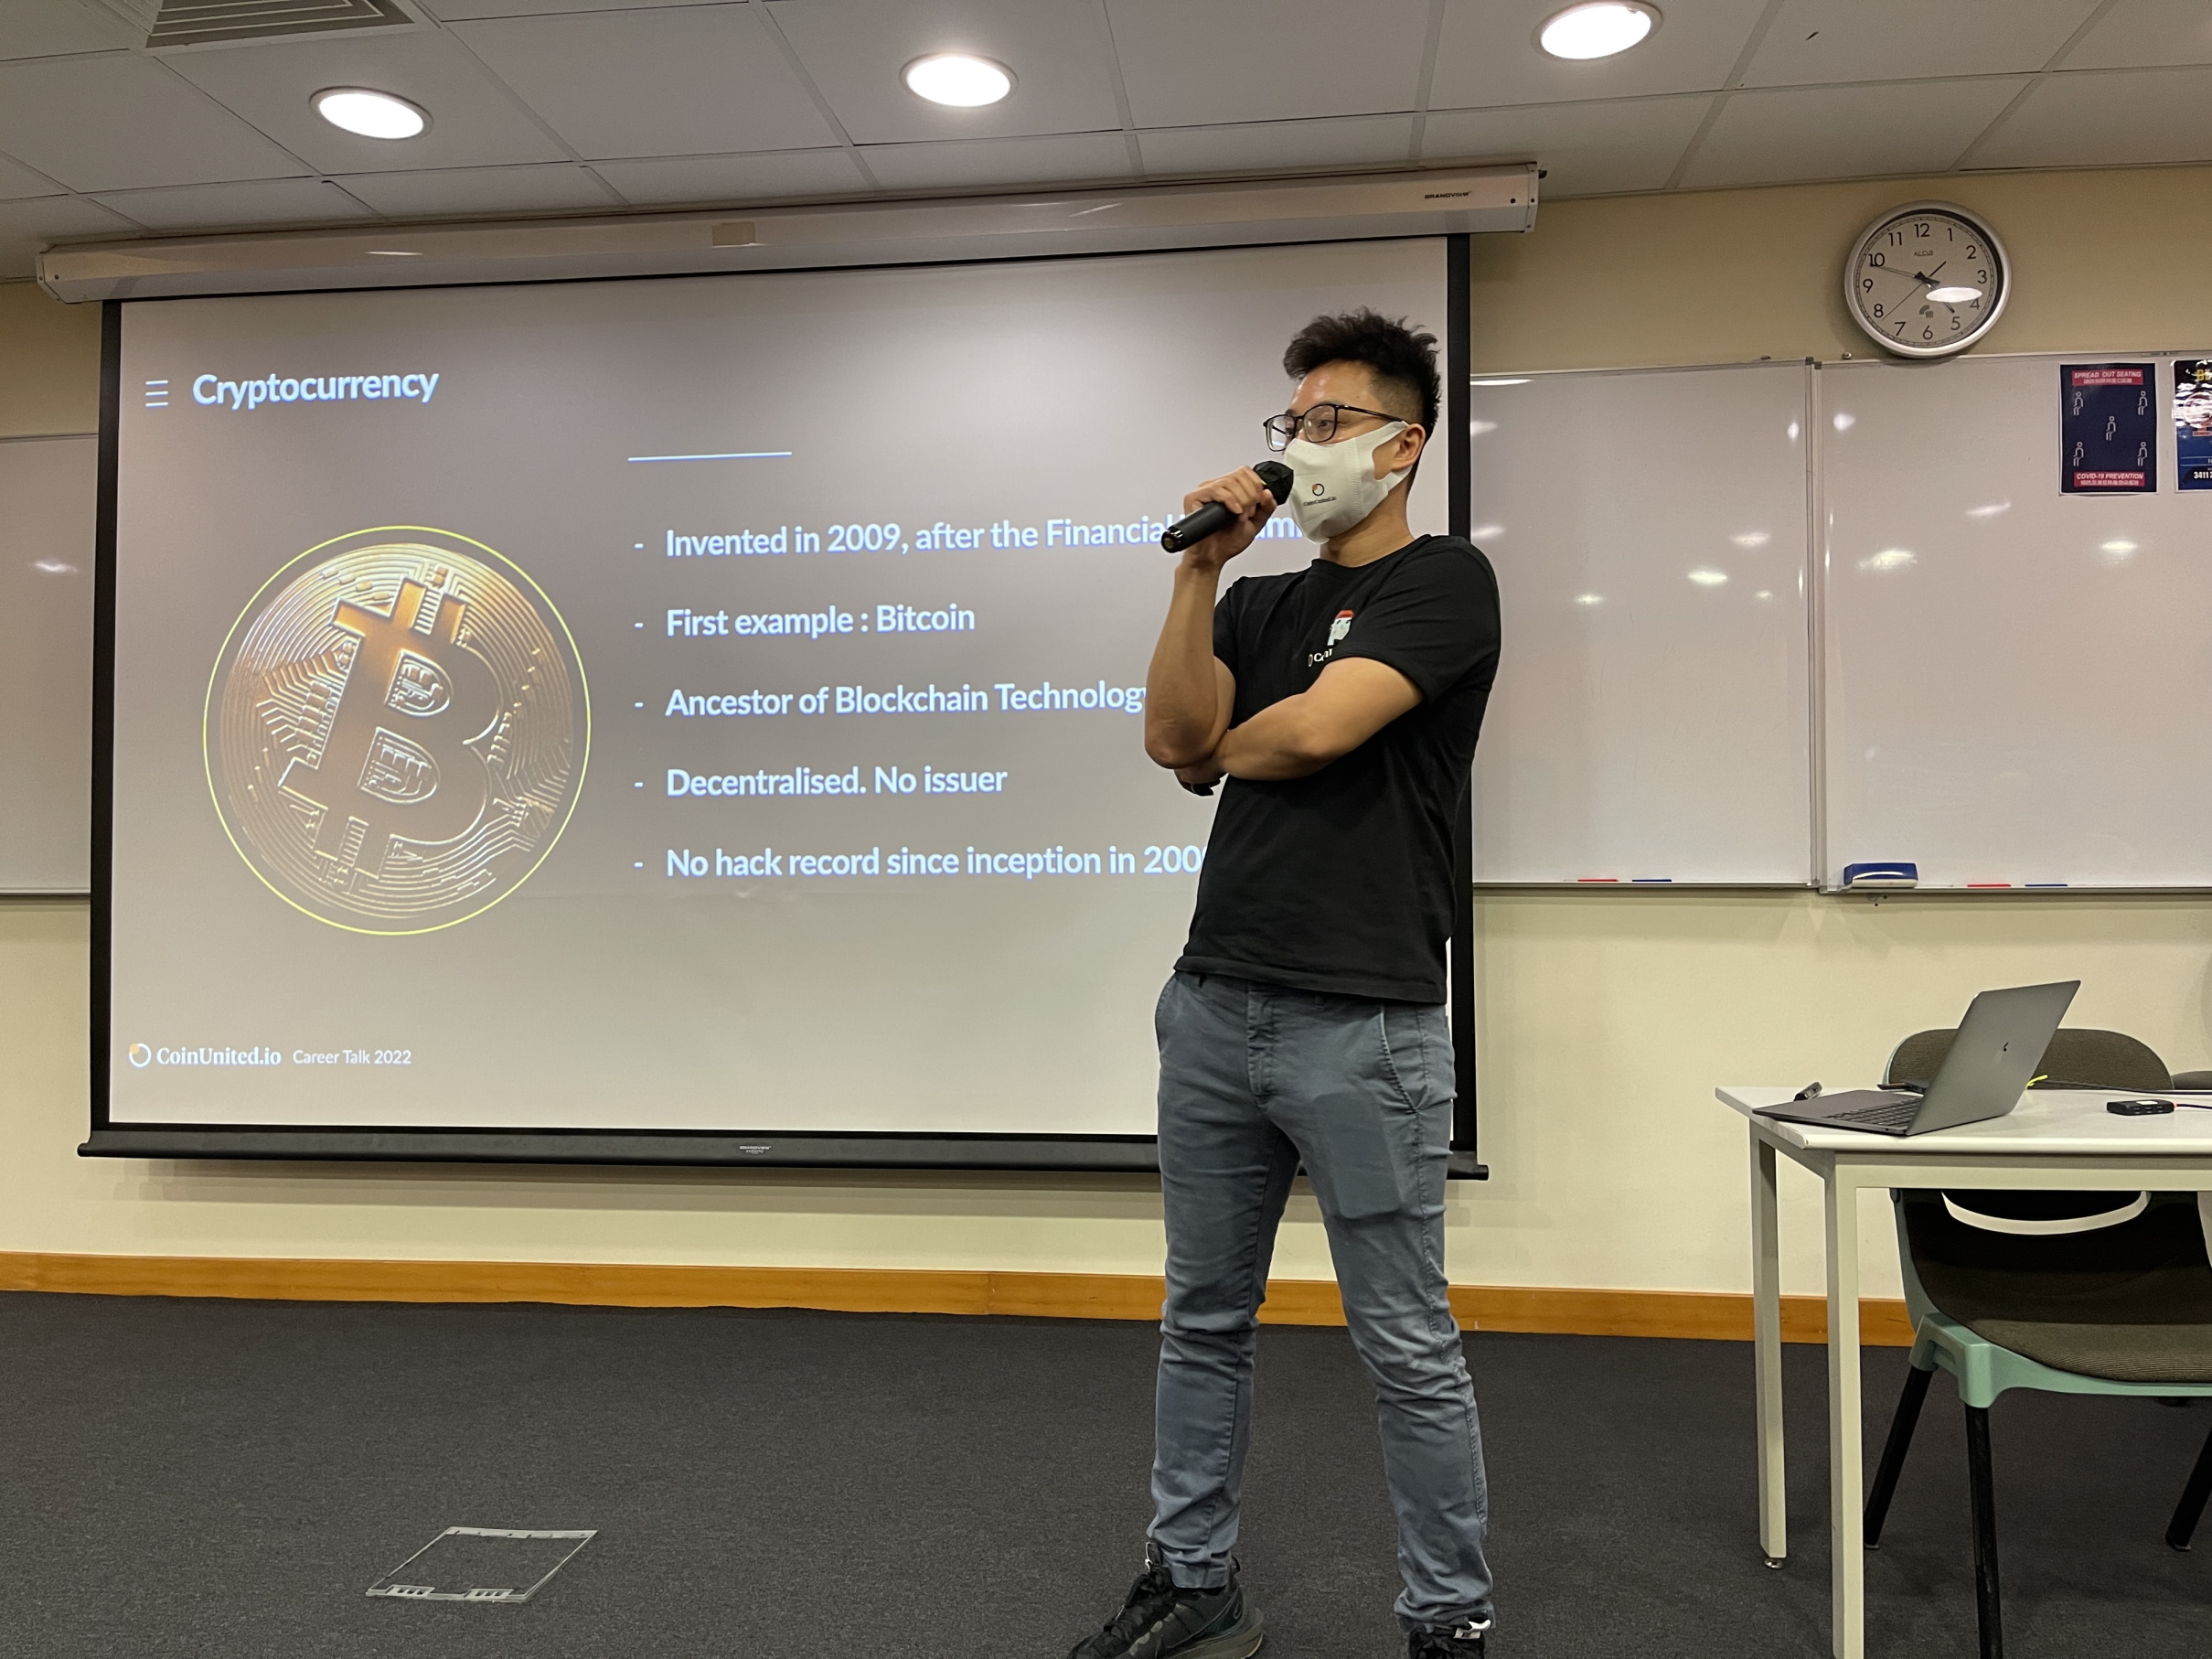 Mr. Angus Lo, Co-founder of CoinUnited.io, shared the background of cryptocurrency.